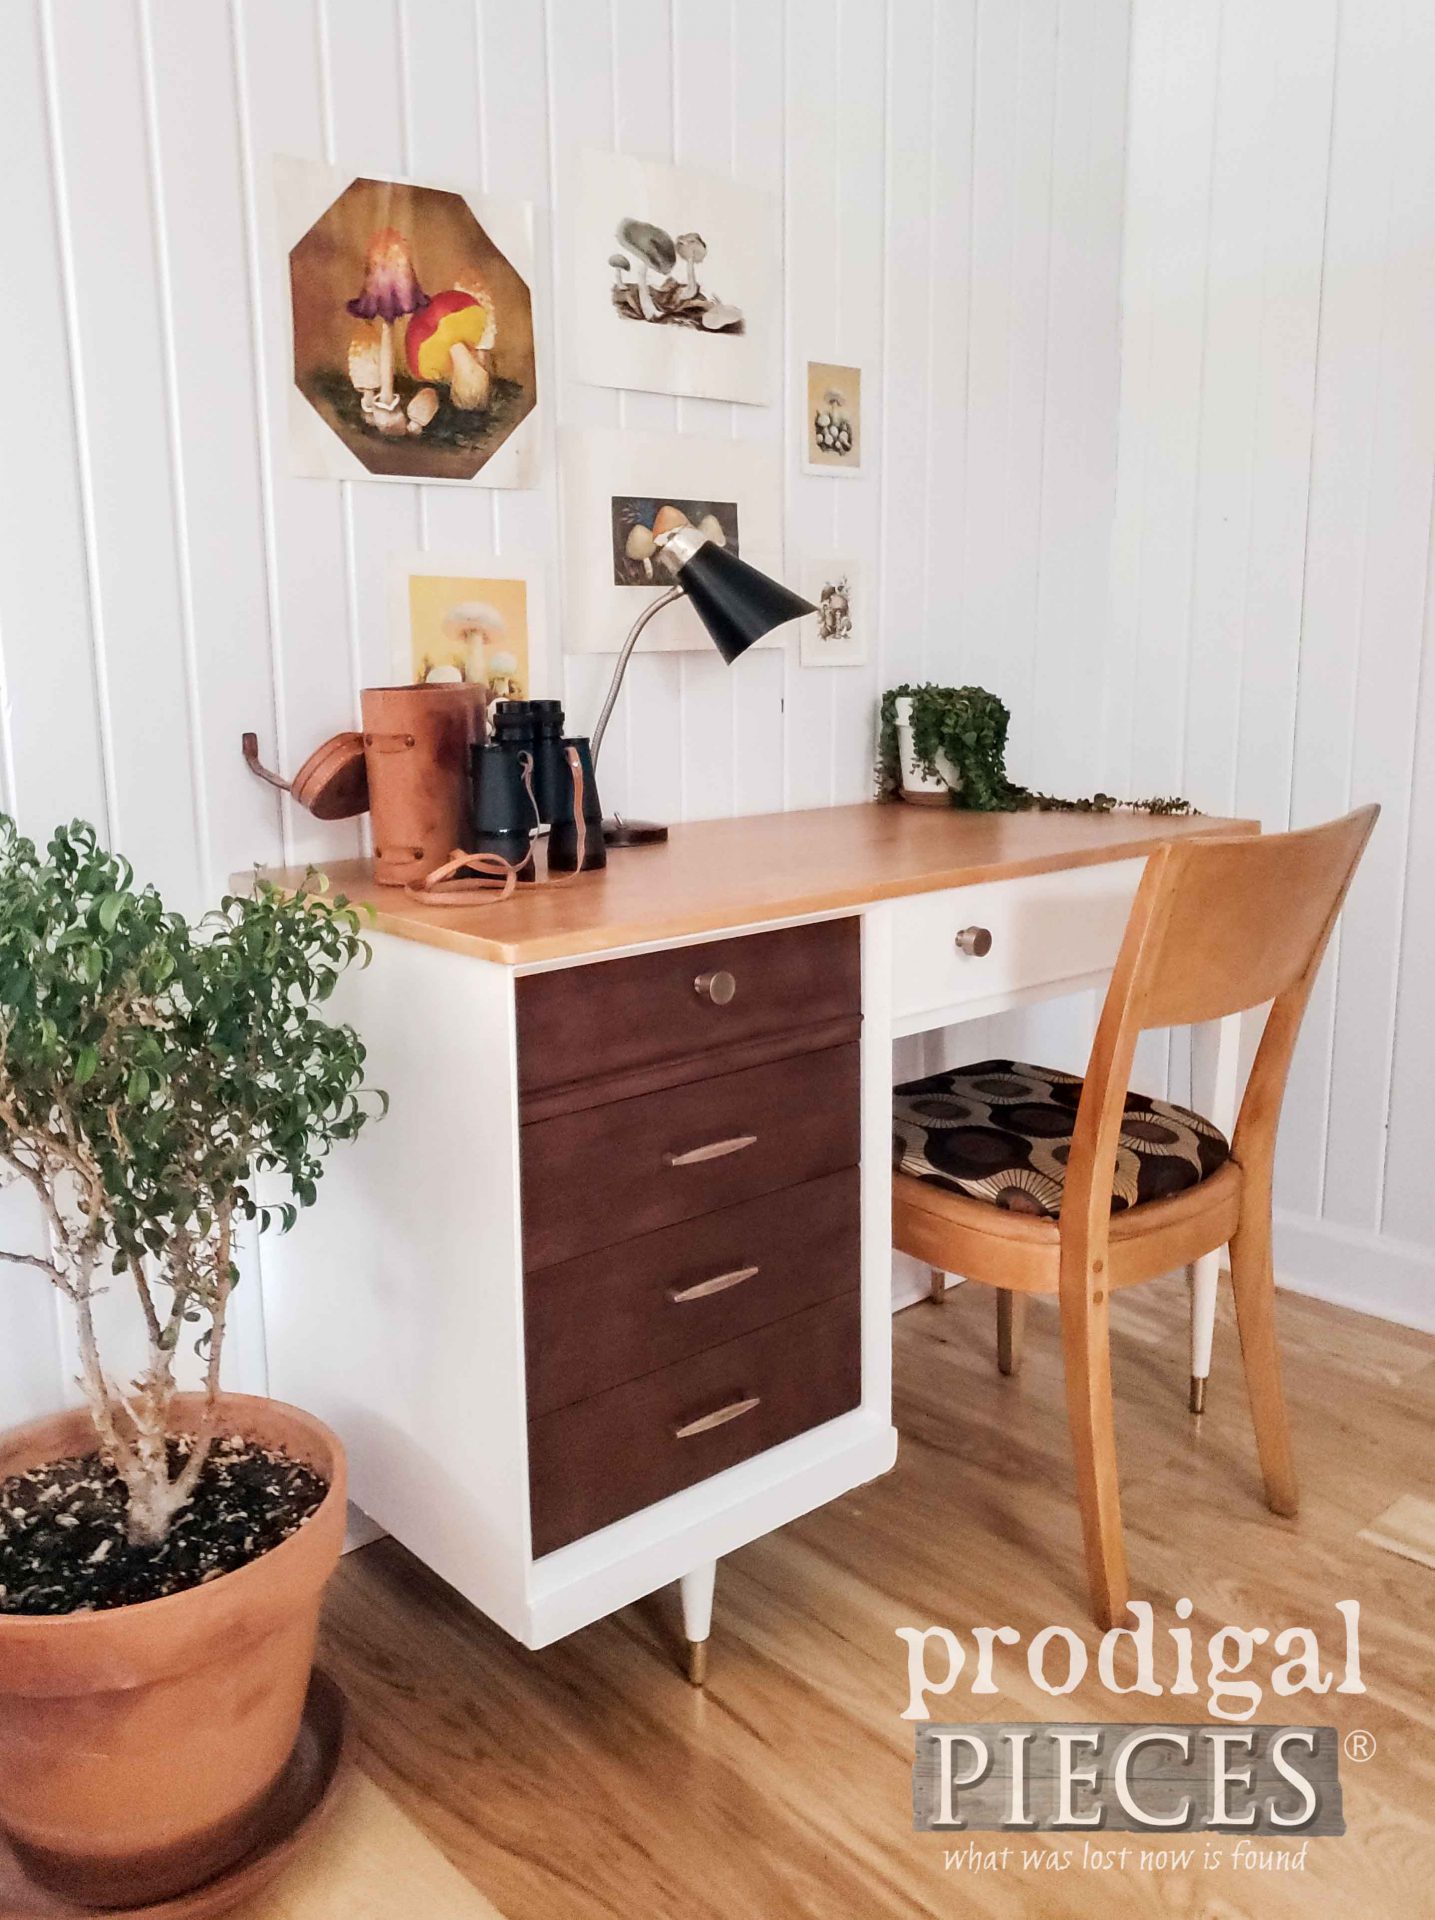 Vintage Mid Century Modern Desk Set with Heywood Wakefield Chair by Larissa of Prodigal Pieces | prodigalpieces.com #prodigalpieces #midcentury #modern #furniture #home #homedecor #vintage